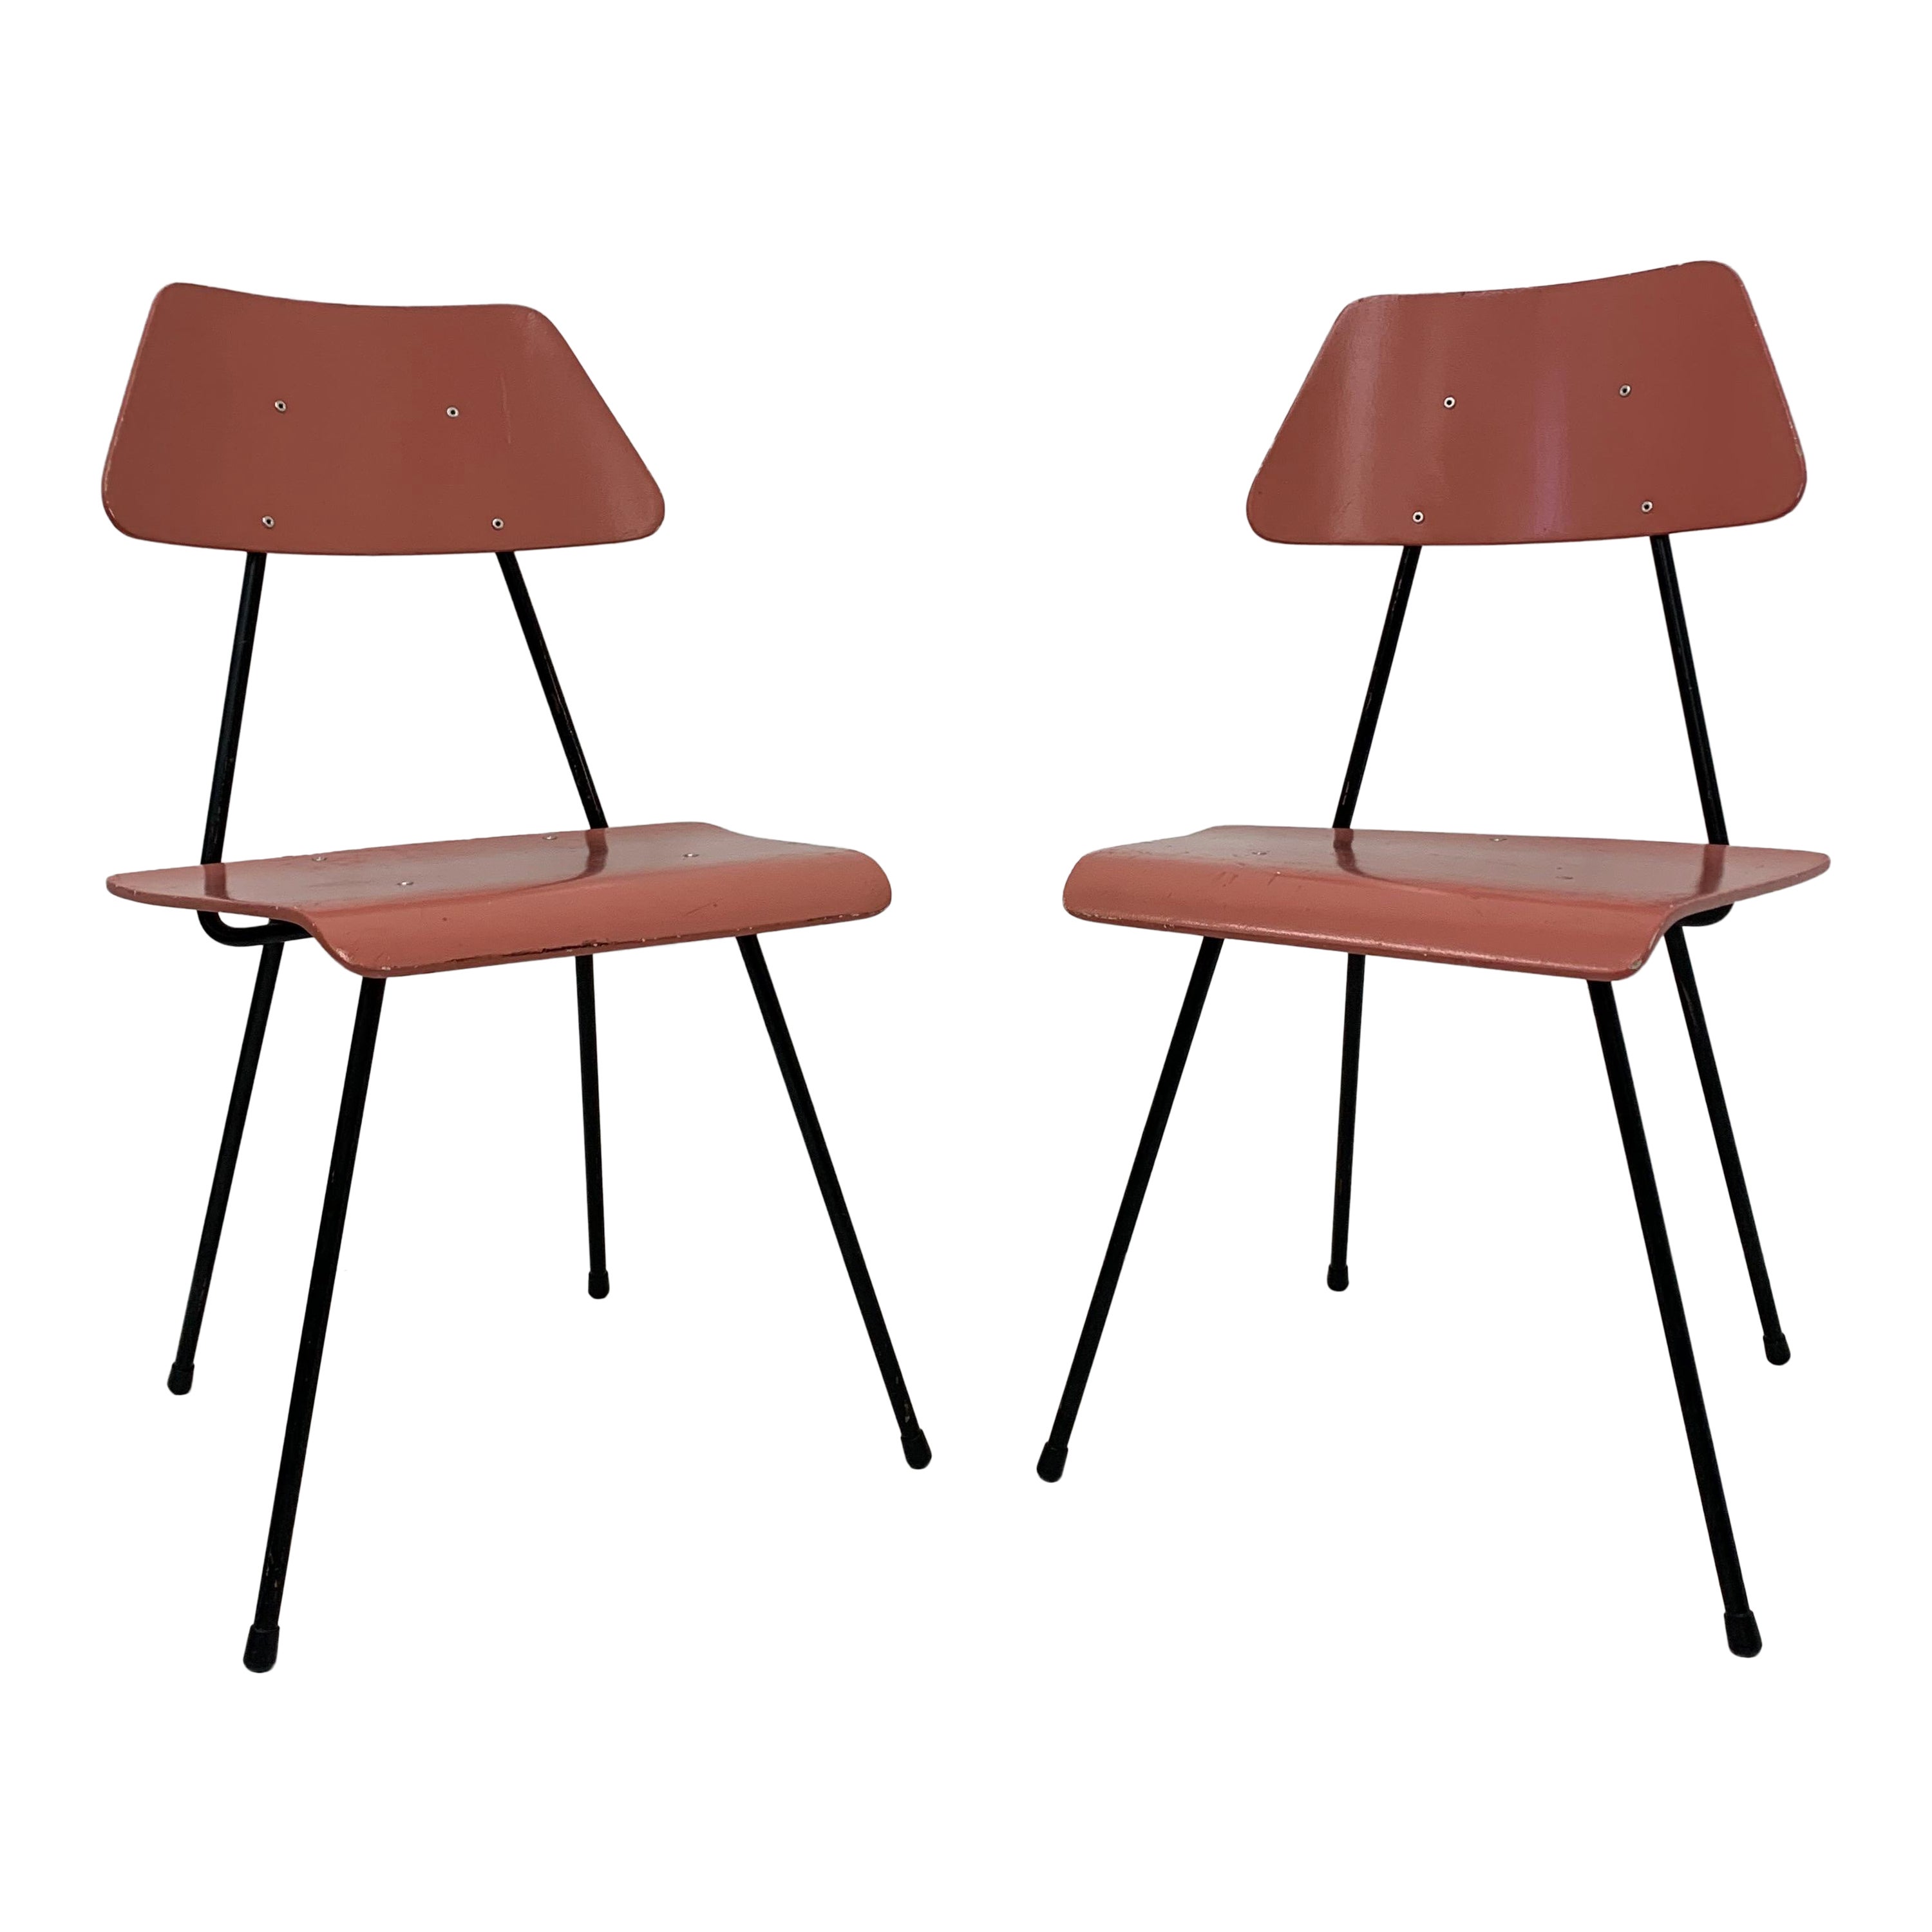 Set of 2 Mid-century rare Rudolf Wolf for Elsrijk wooden chairs , 1950’s vintage